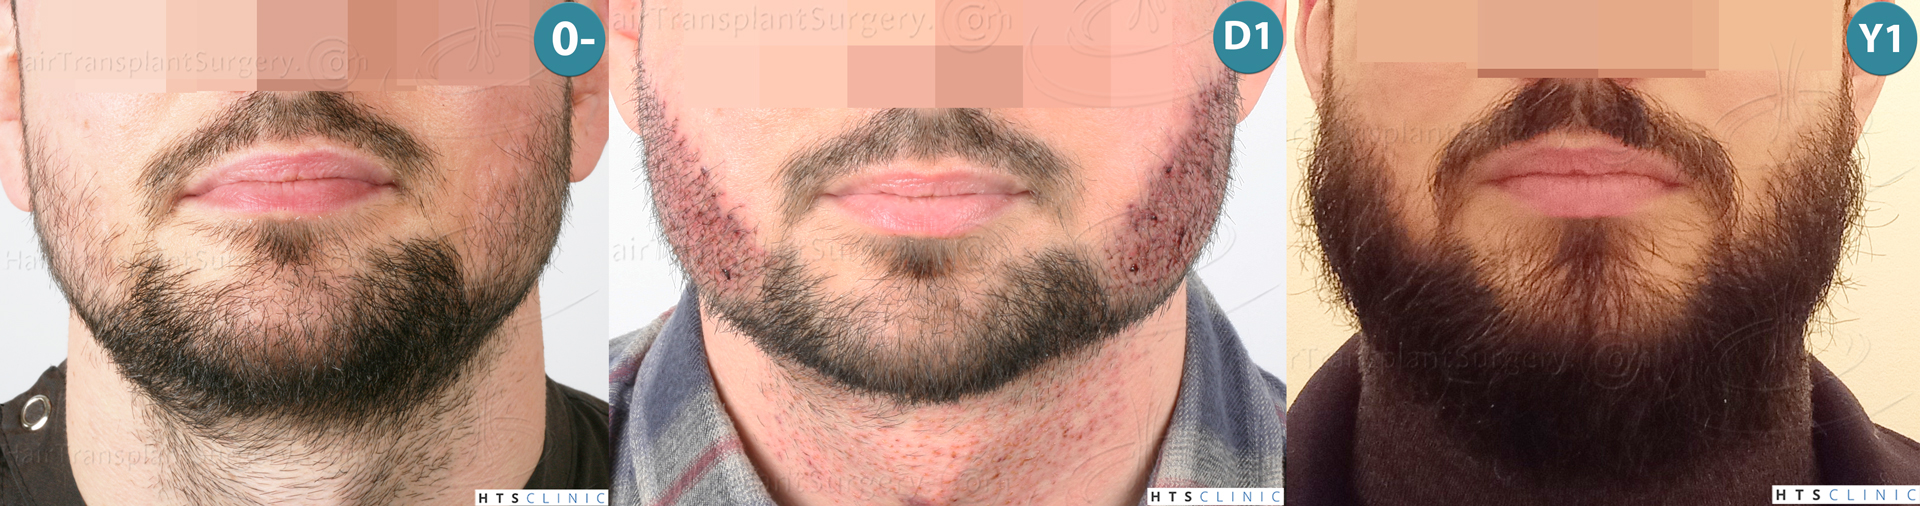 Dr.Devroye-HTS-Clinic-1523-FUE-Beard-Montage-1